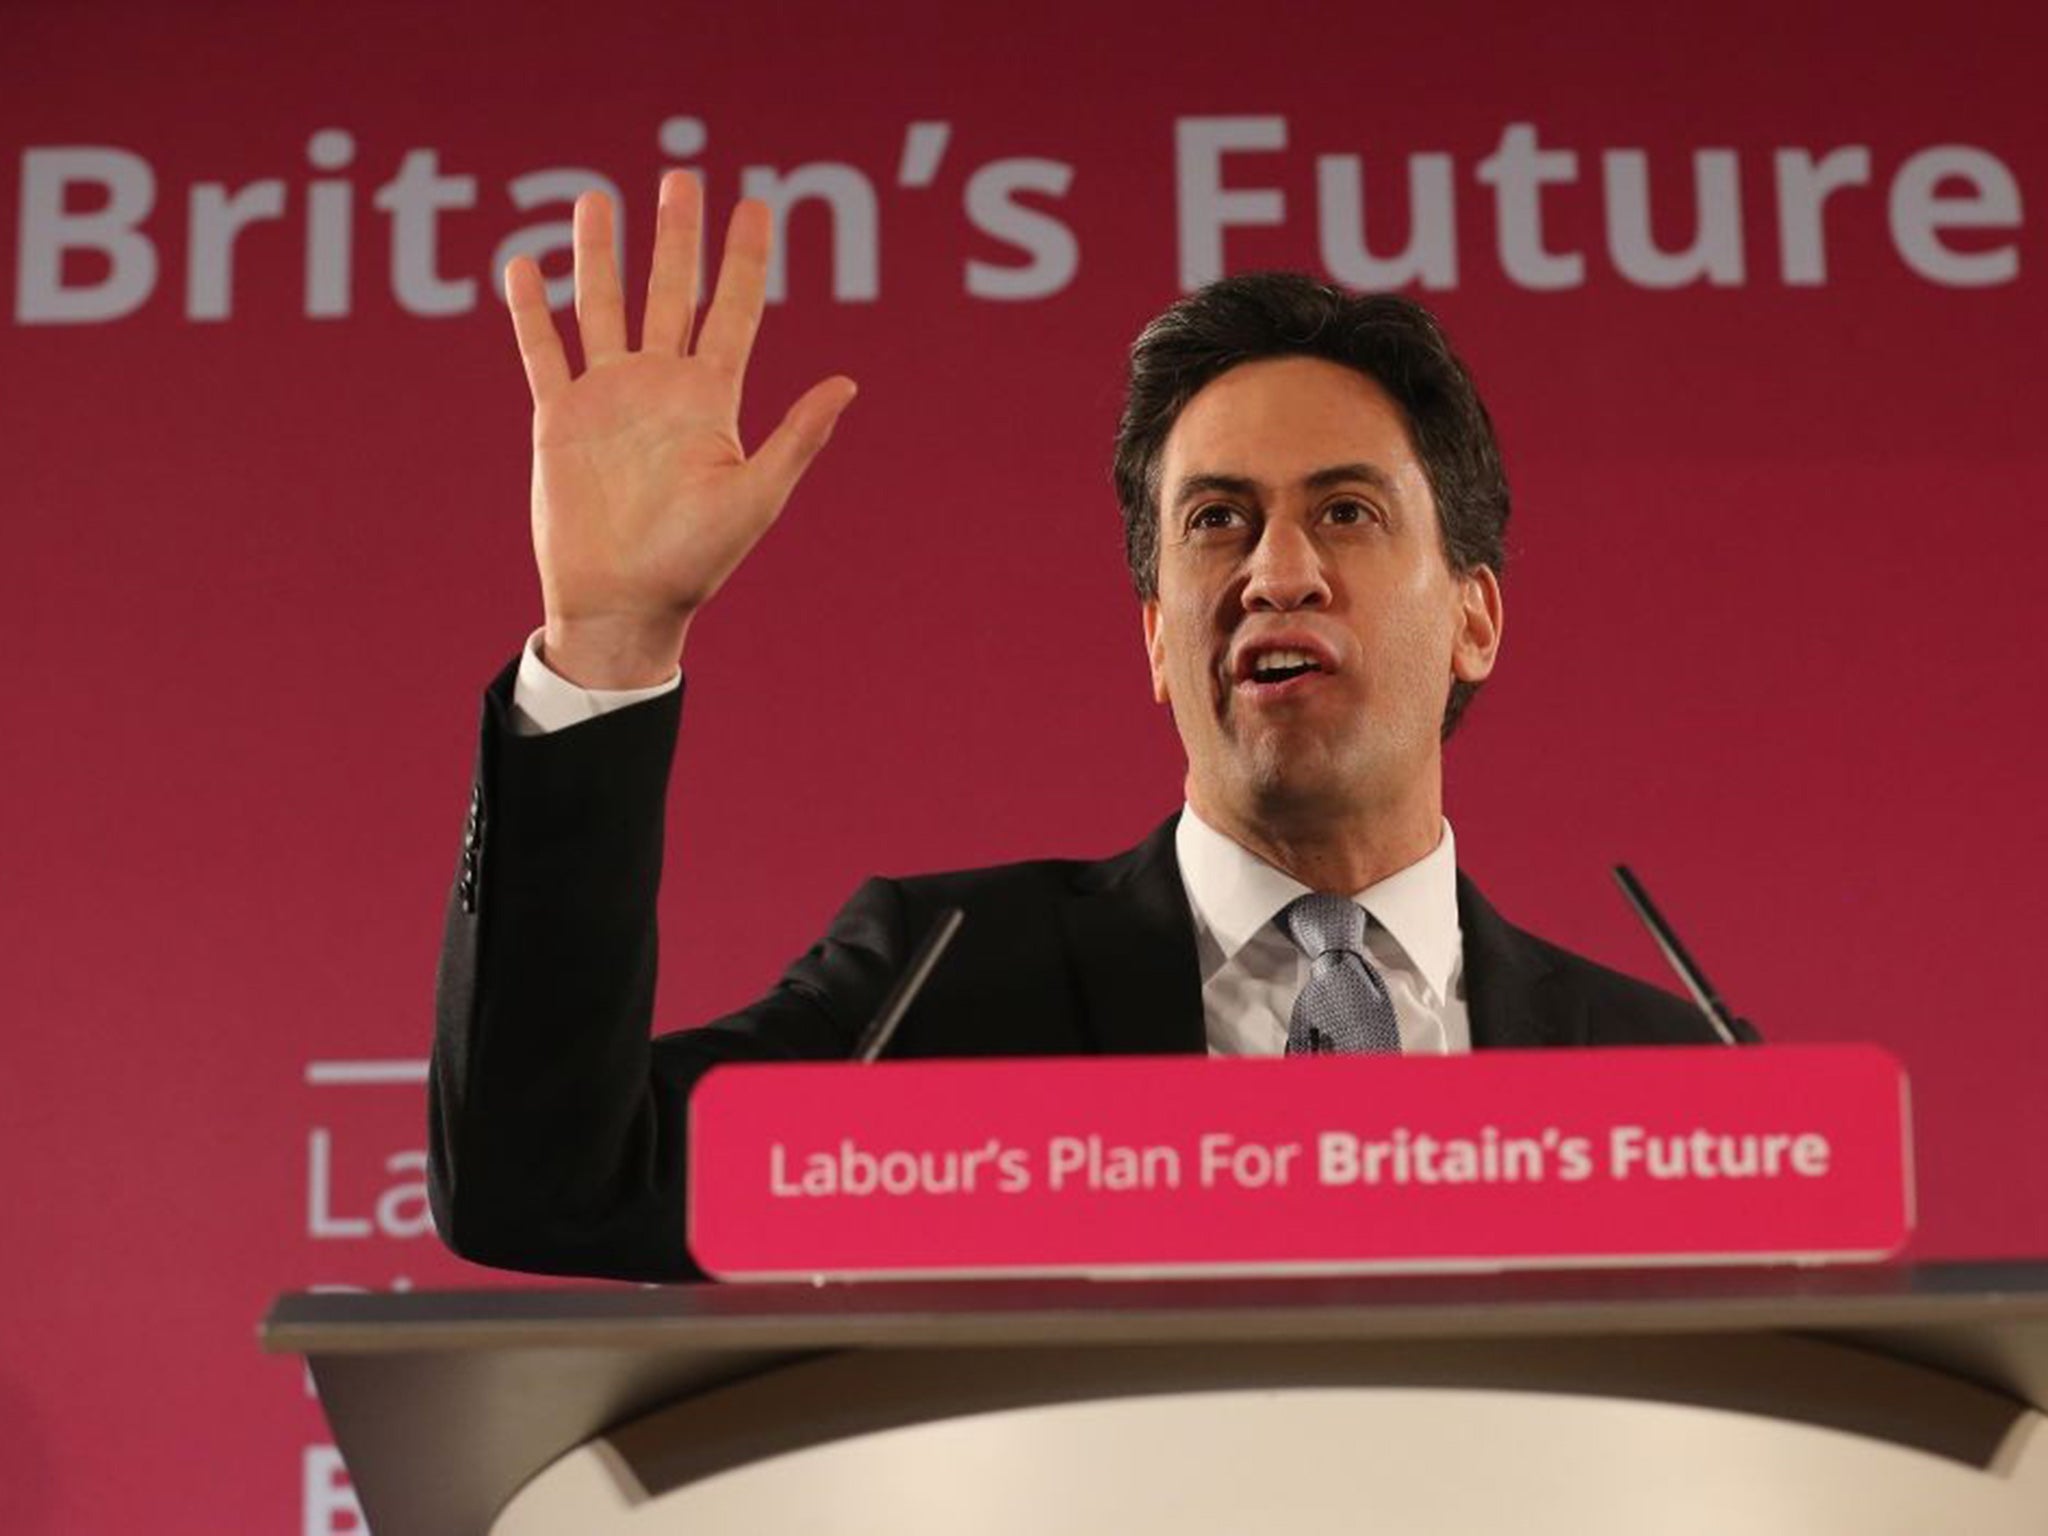 Ed Miliband addresses Labour activitists as he launches the party's 2015 election campaign at the Lowry Centre on 5 January 2015 in Salford, England